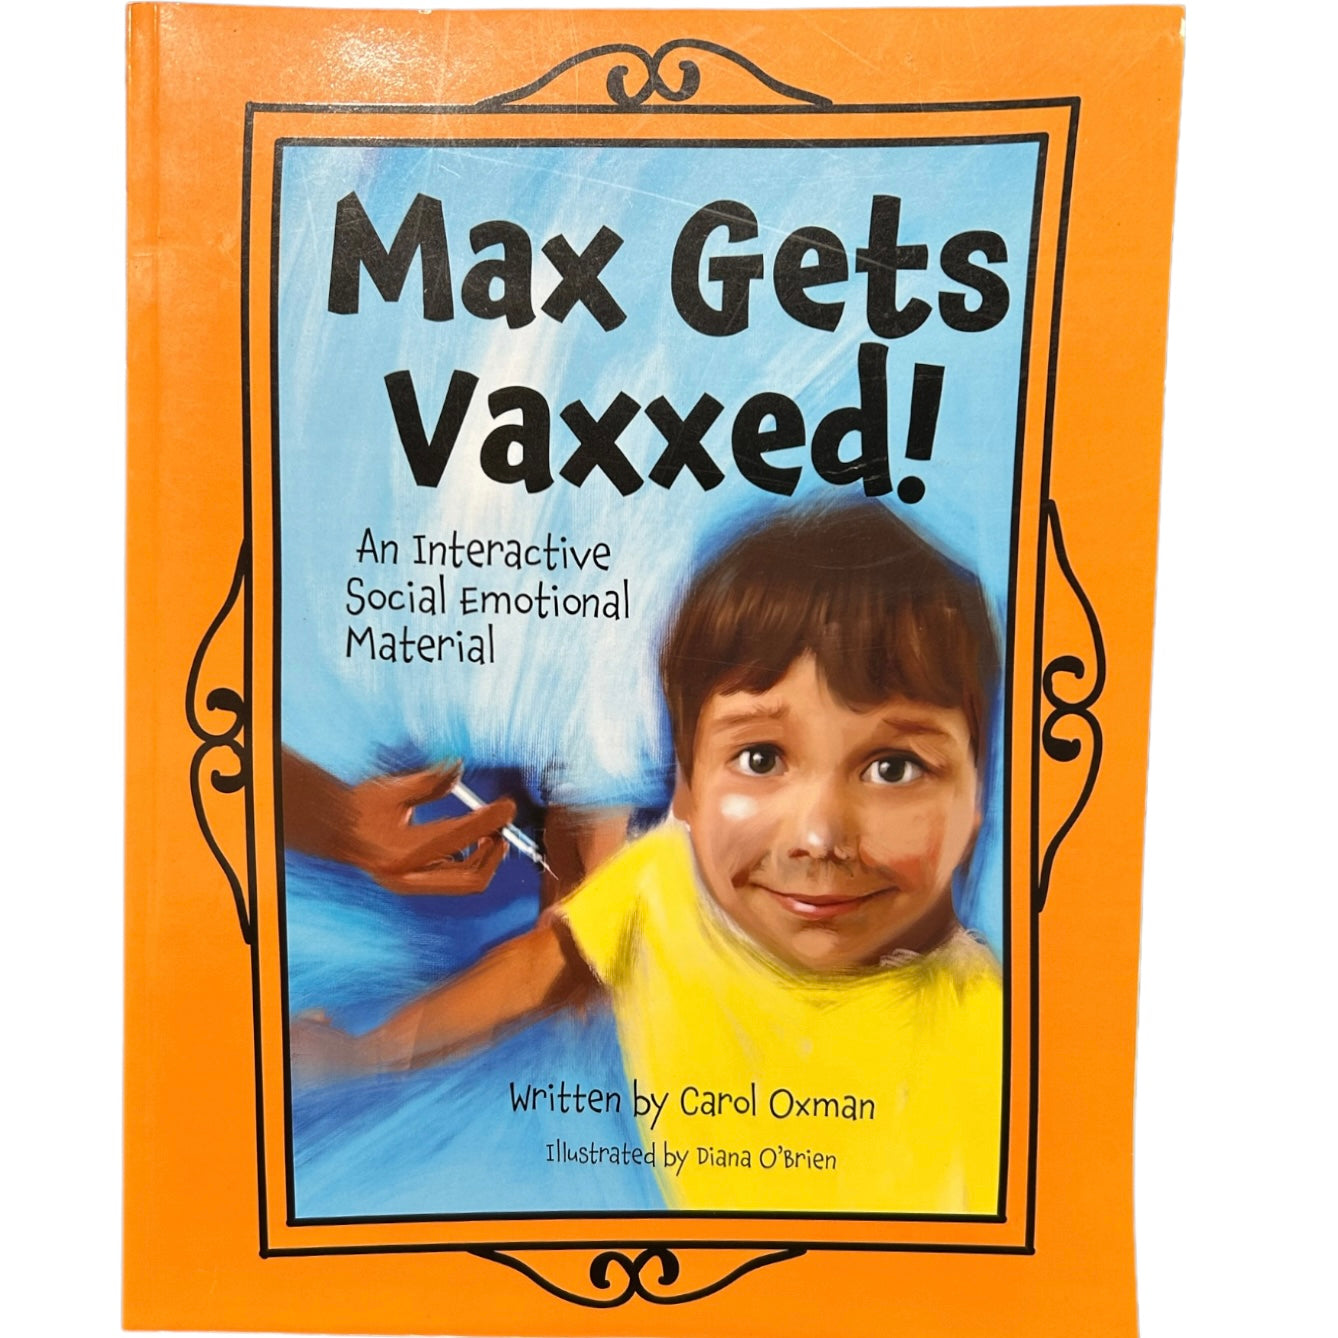 Max Gets Vaxxed!